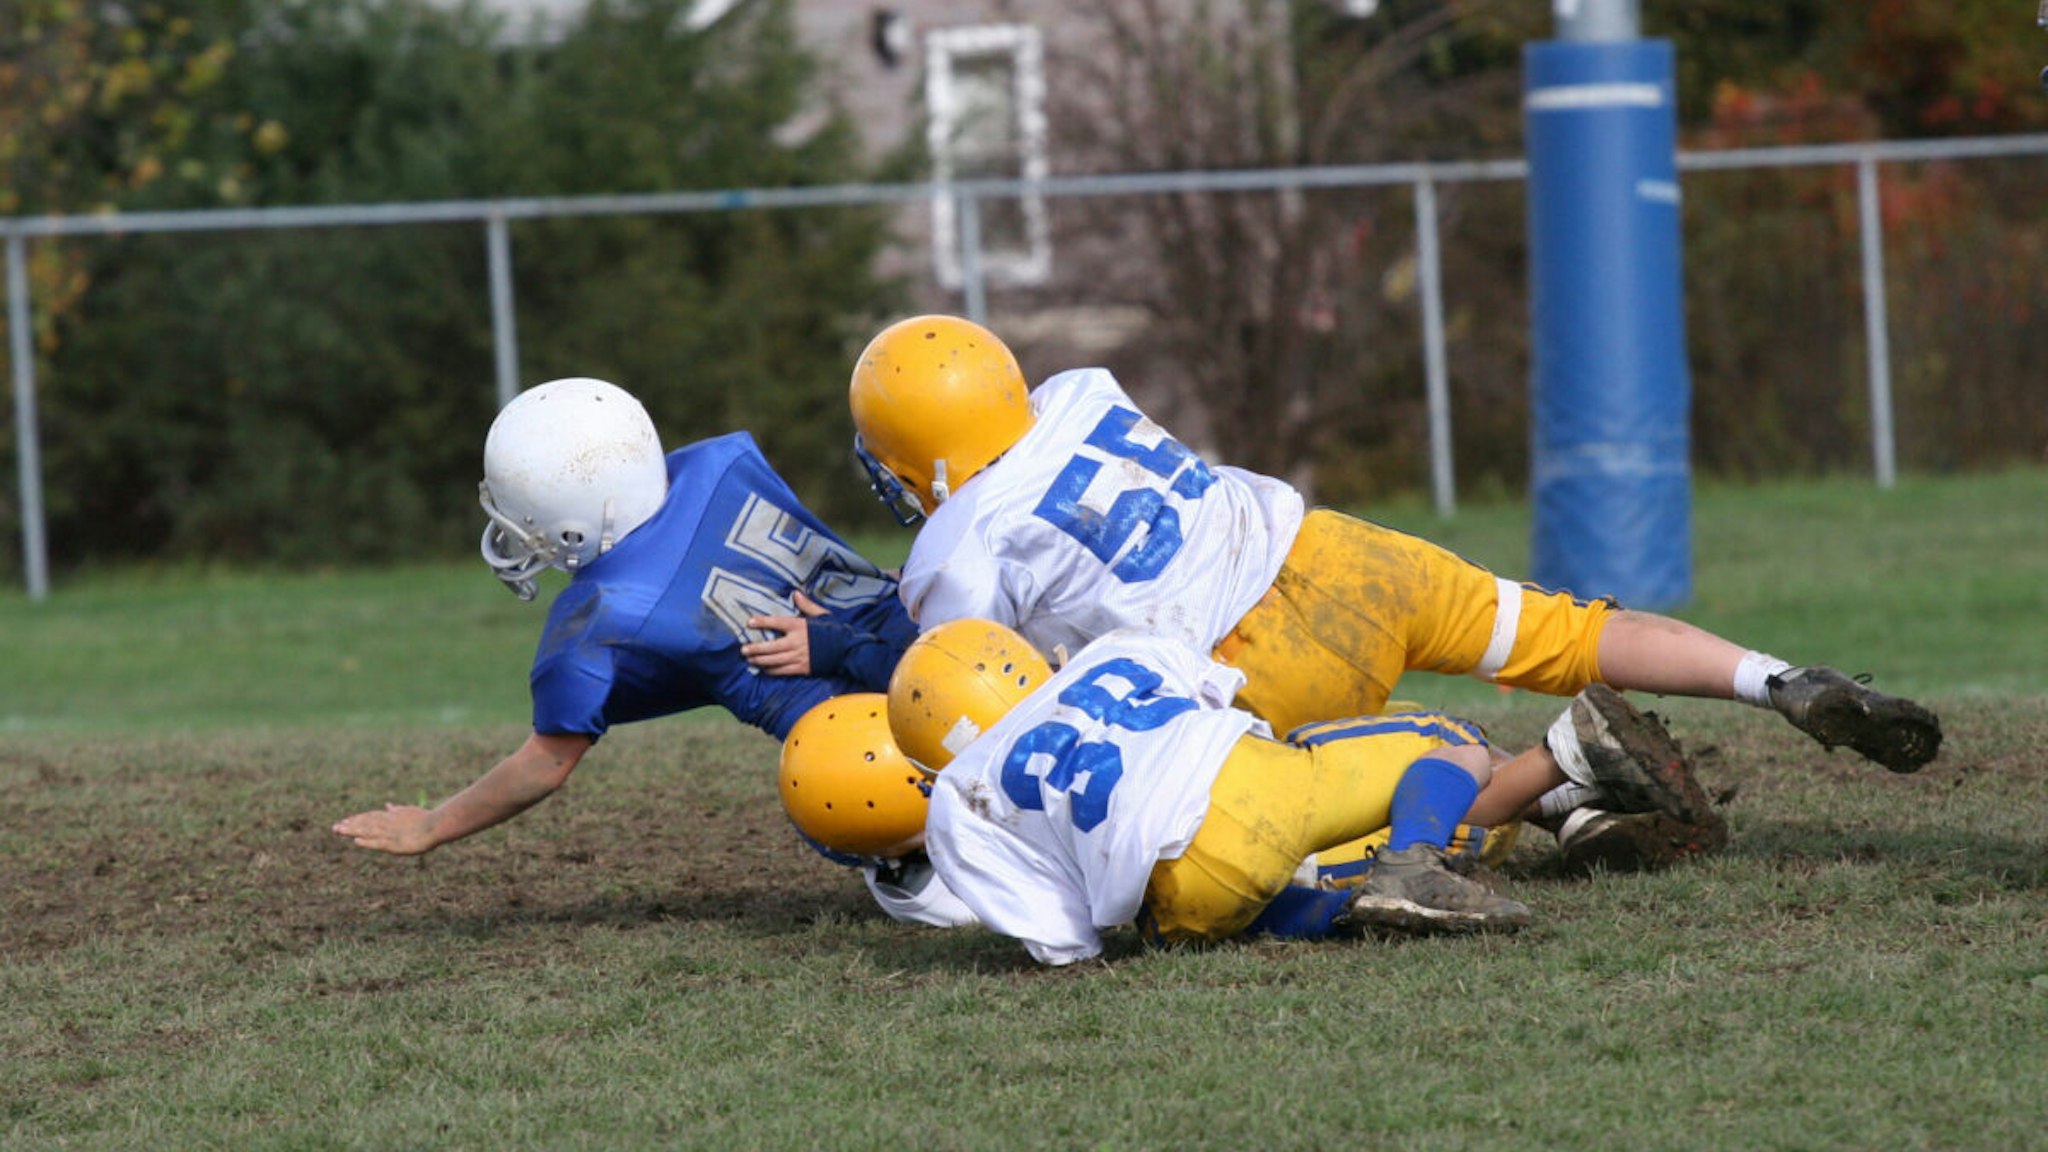 Football tackle at youth game during the day.